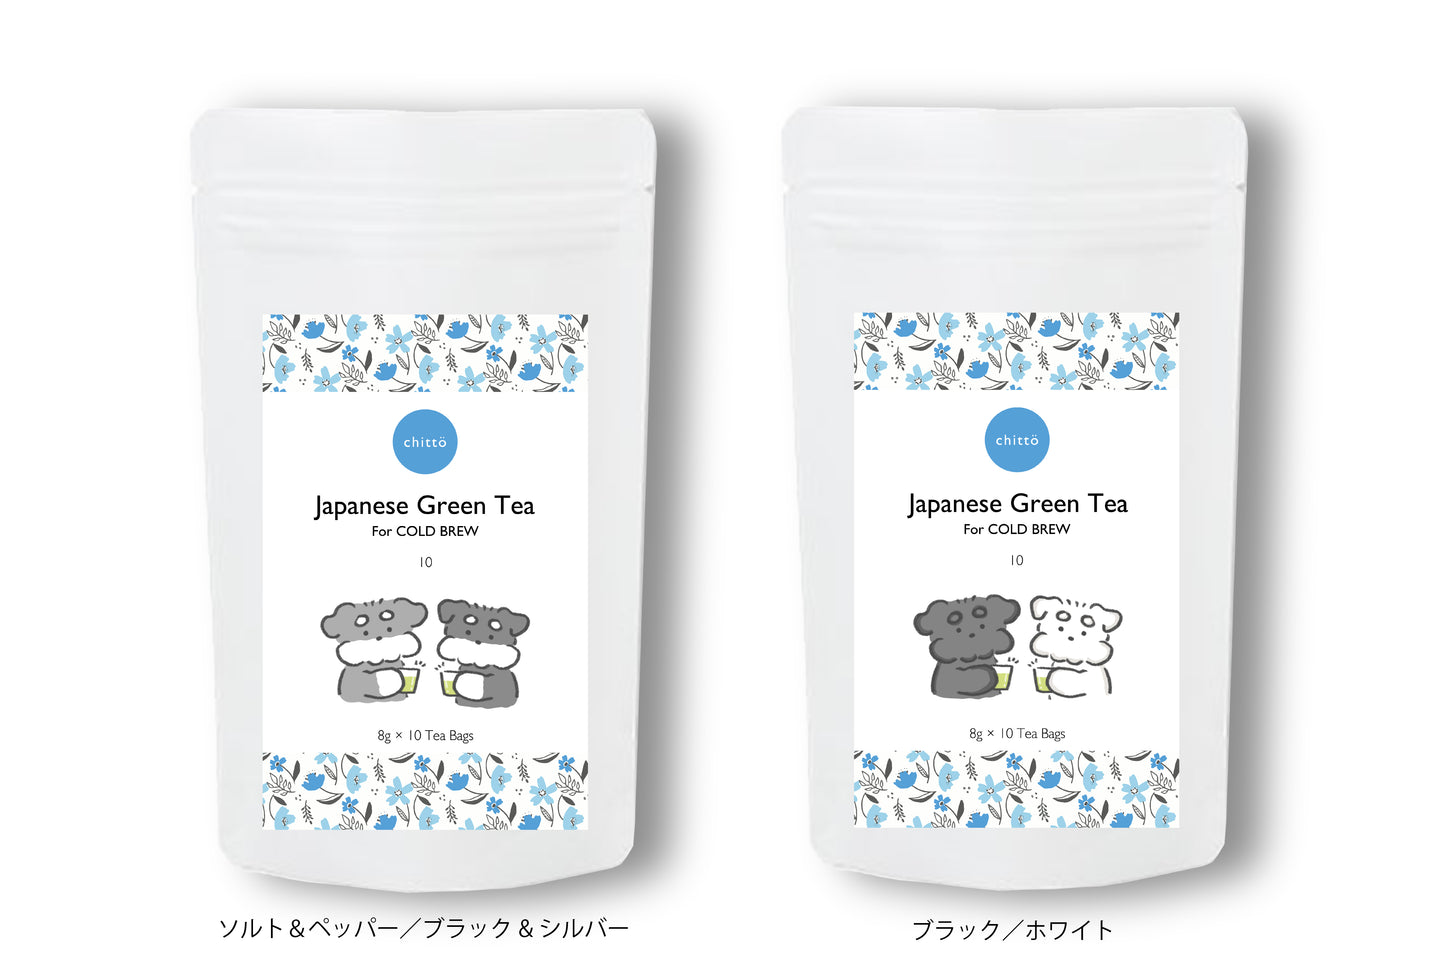 &lt;Click Post Exclusive&gt; 3 types of JAPANESE TEA to choose from 3 types of tea bags with Dogs. series